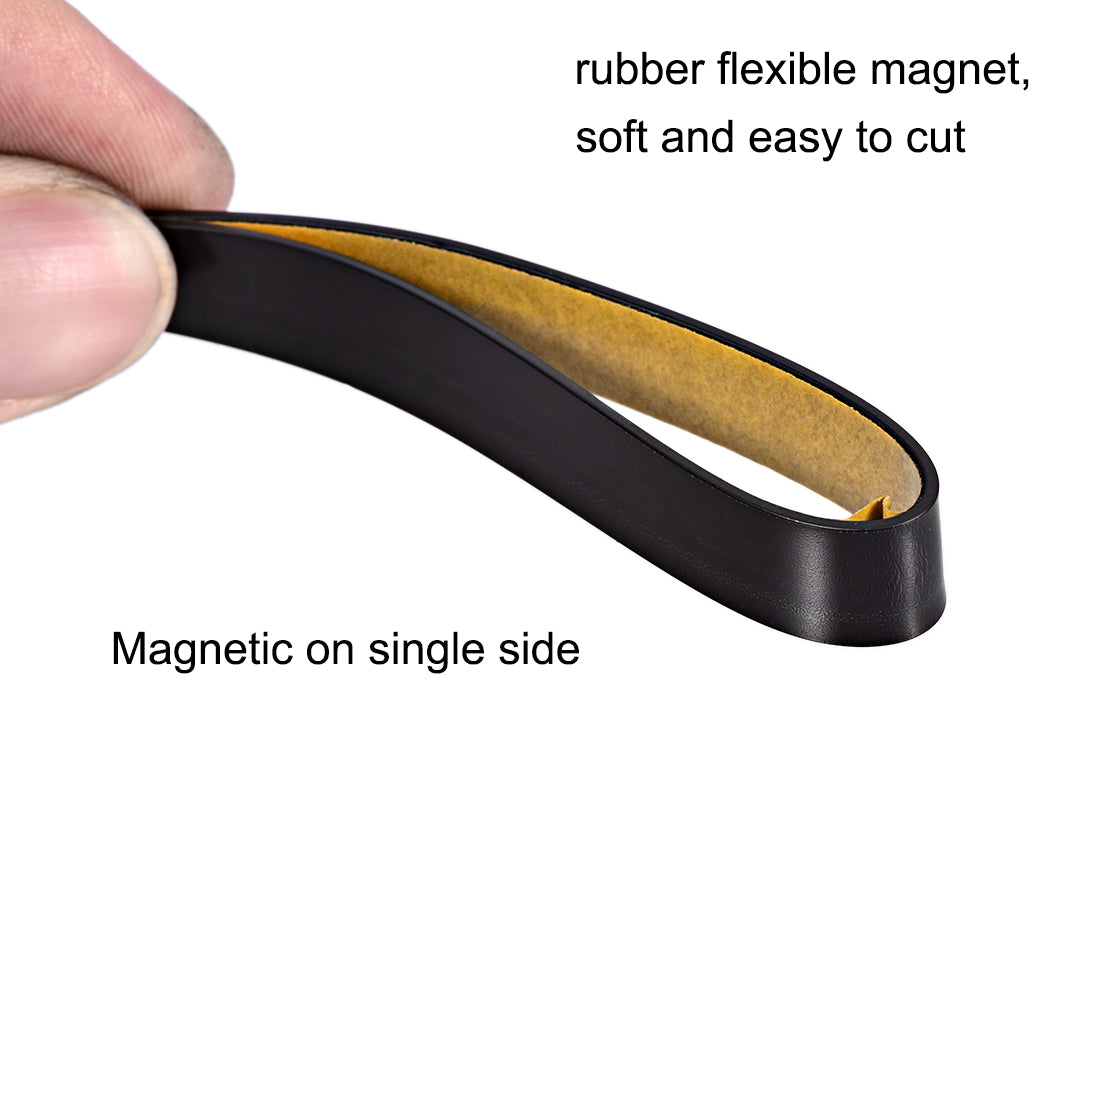 Uxcell Uxcell Adhesive Black Magnetic Strip with Yellow Cover 25/64 Inch x 9.8 Feet